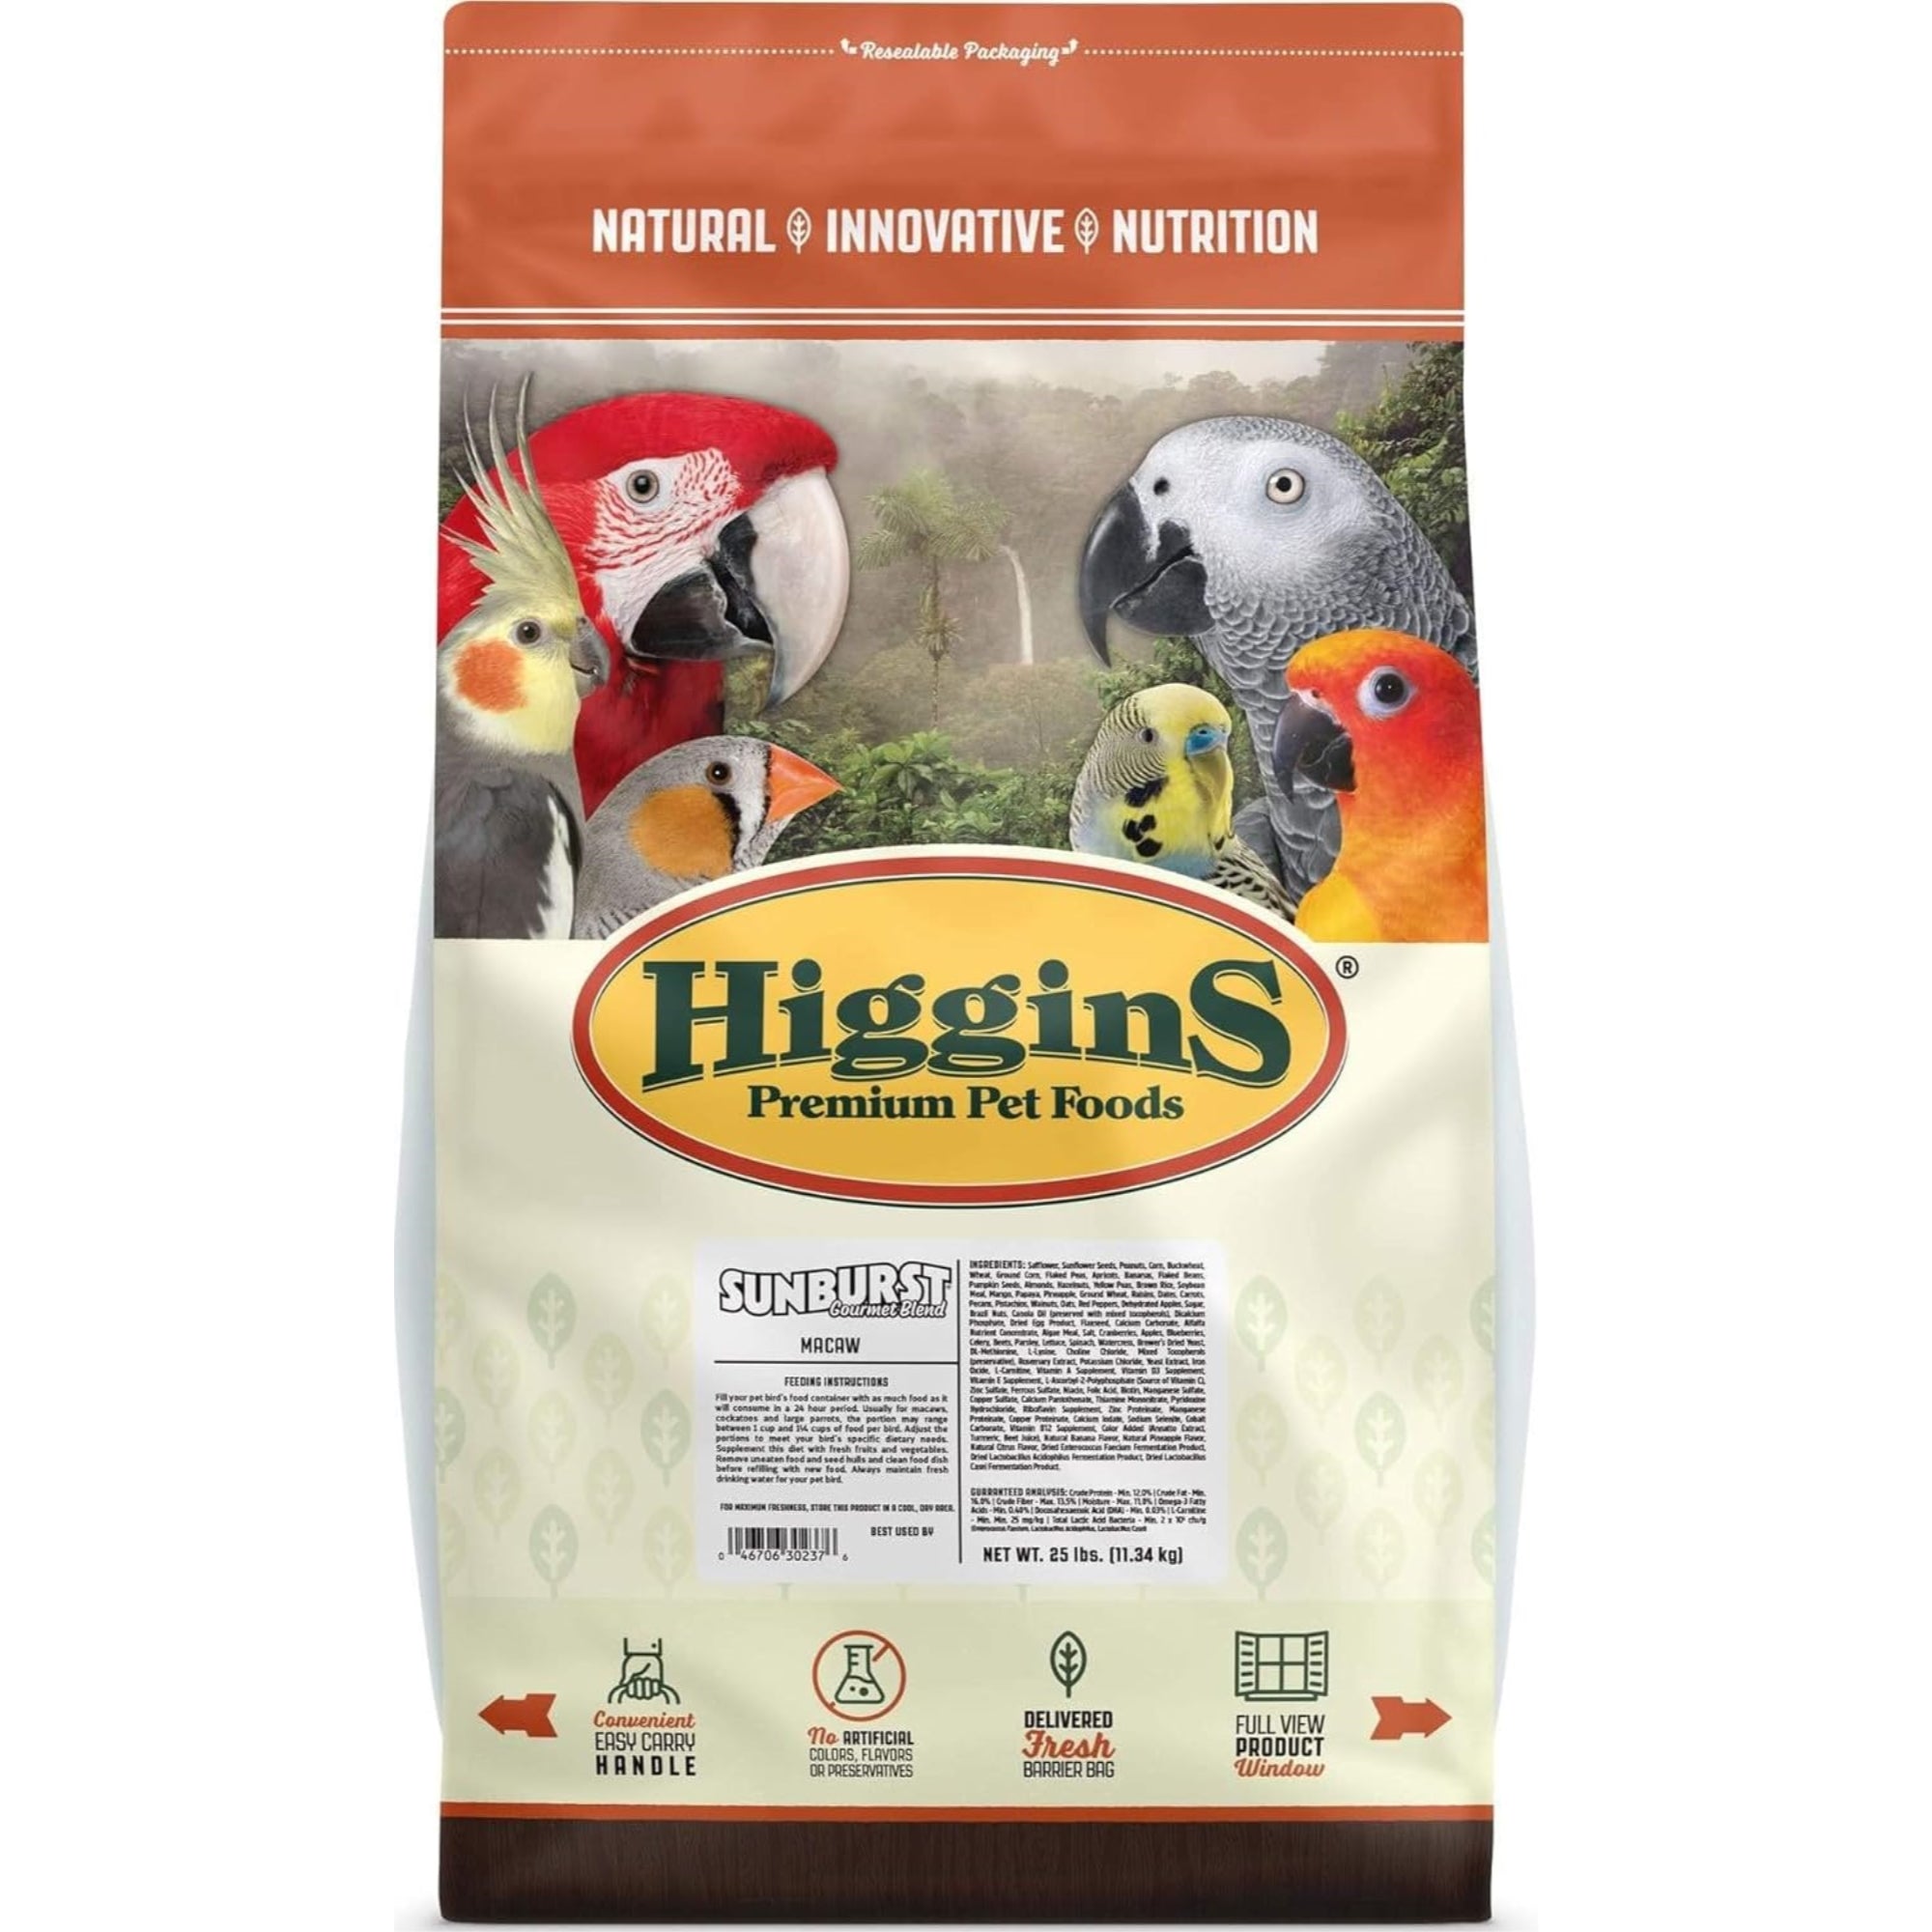 Higgins Sunburst Gourmet Bird Food Blend for Macaws, Food and Treat in One, 25lbs